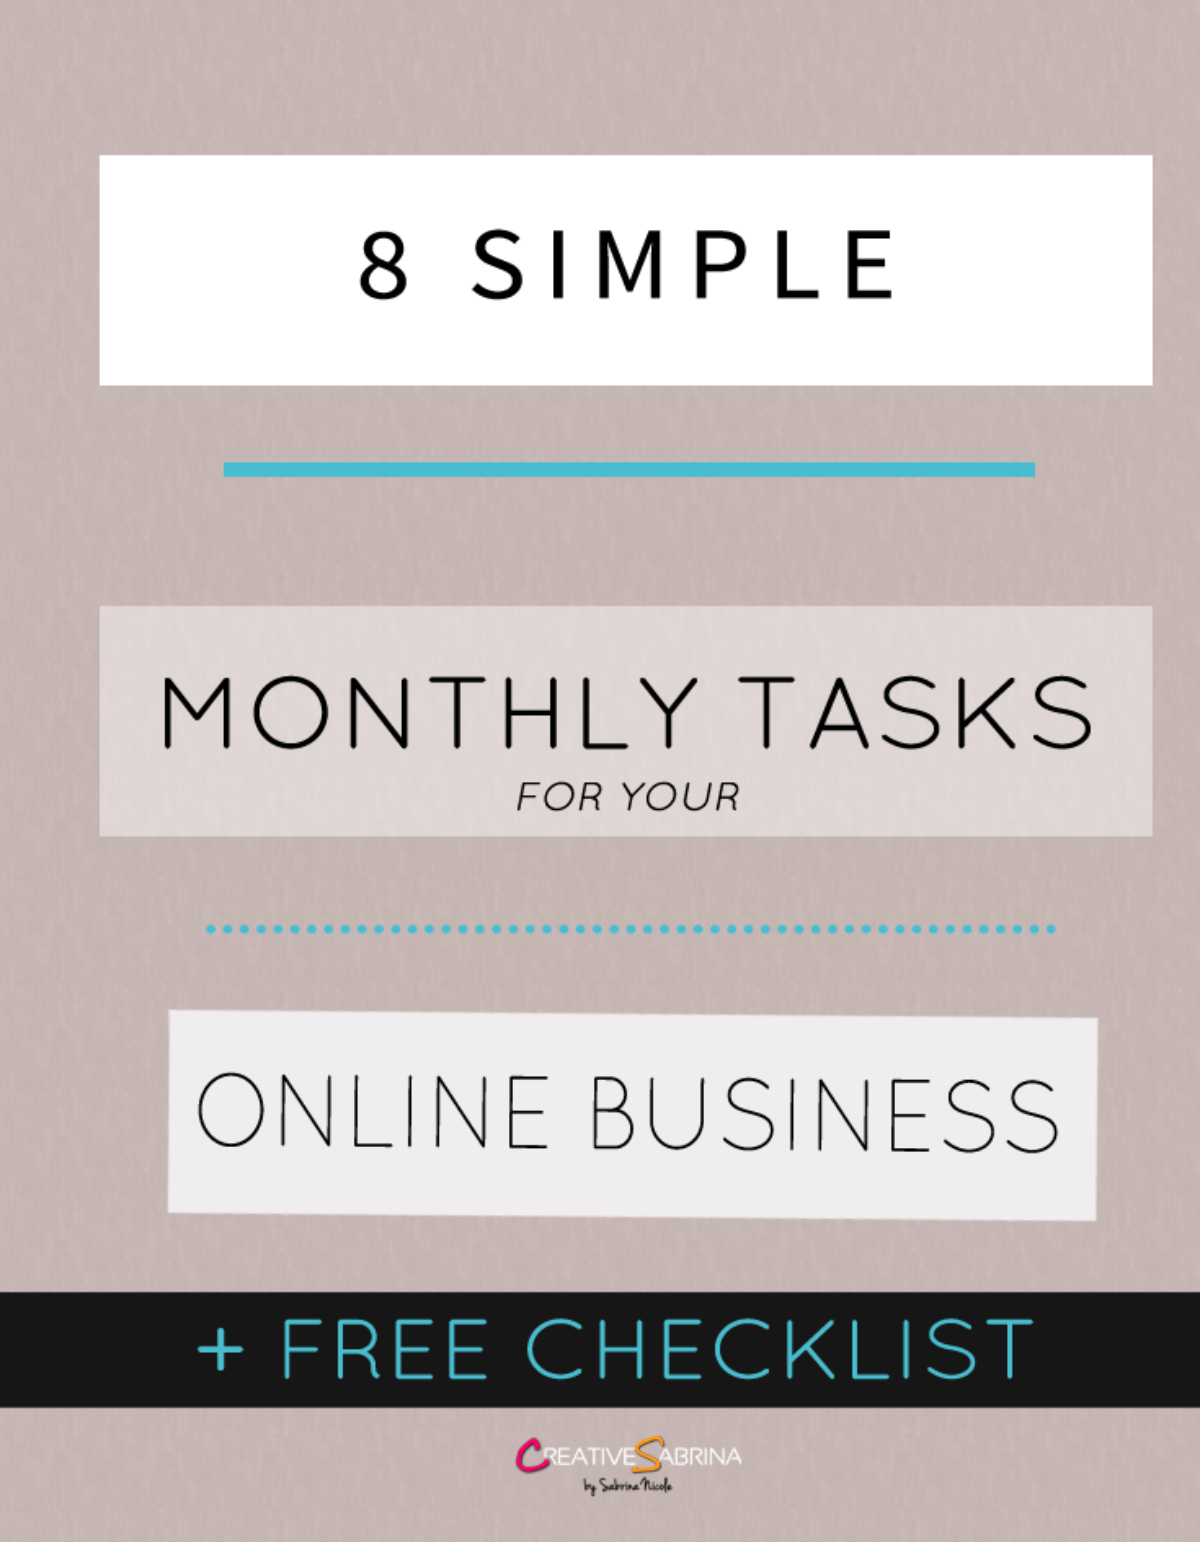 8 Simple Monthly Tasks For Your Online Business + Free Checklist